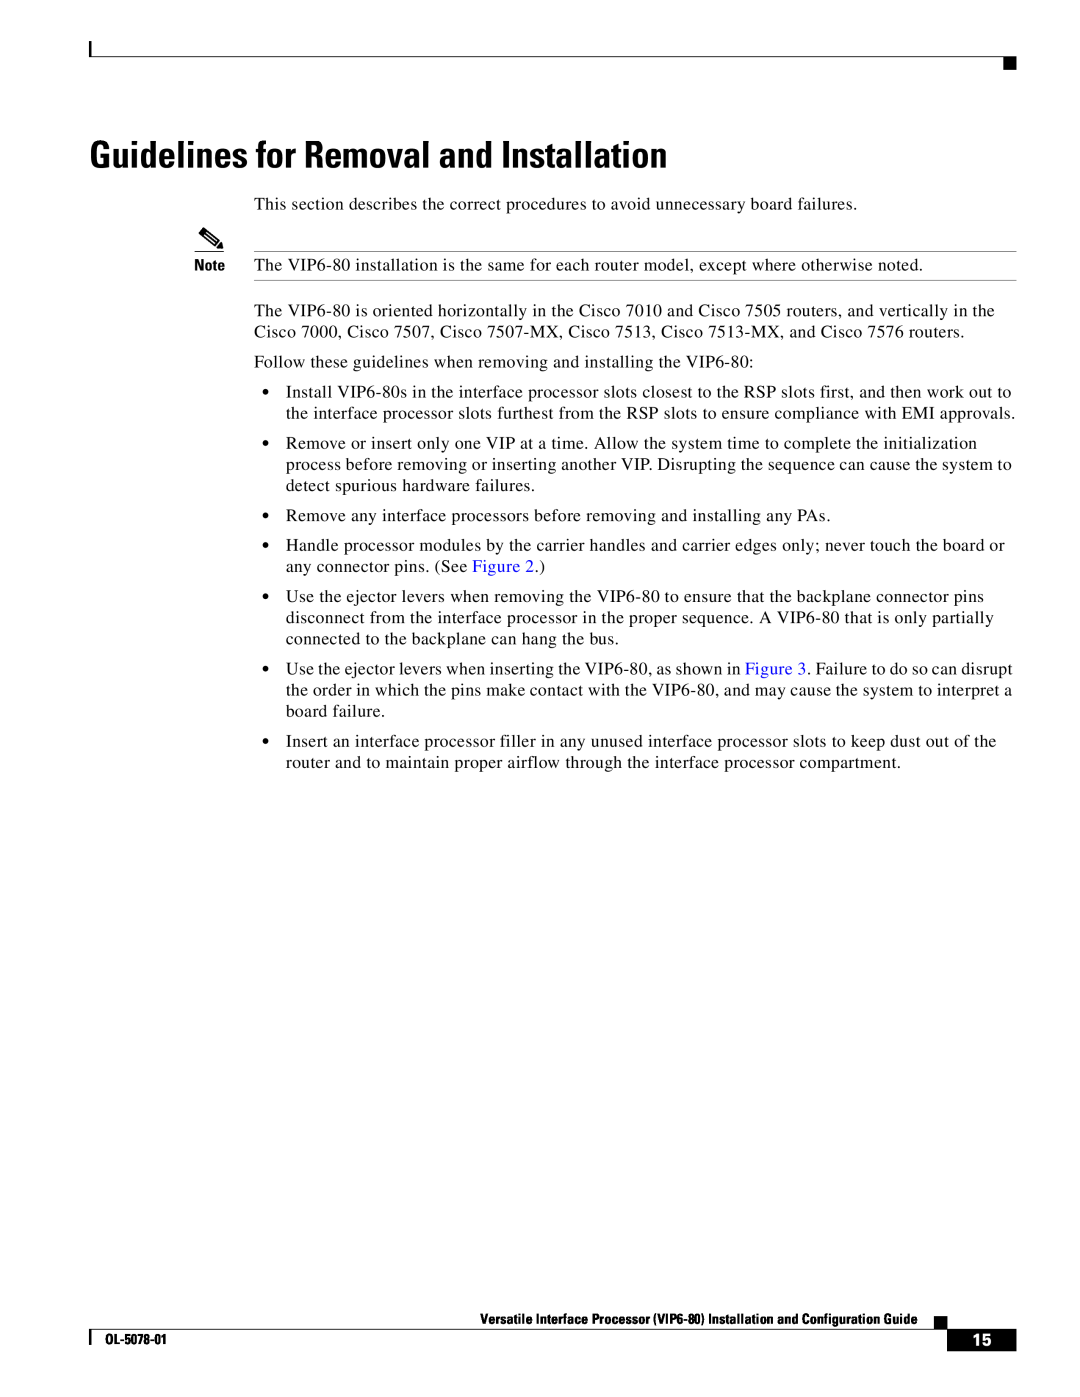 Cisco Systems (VIP6-80) manual Guidelines for Removal and Installation 